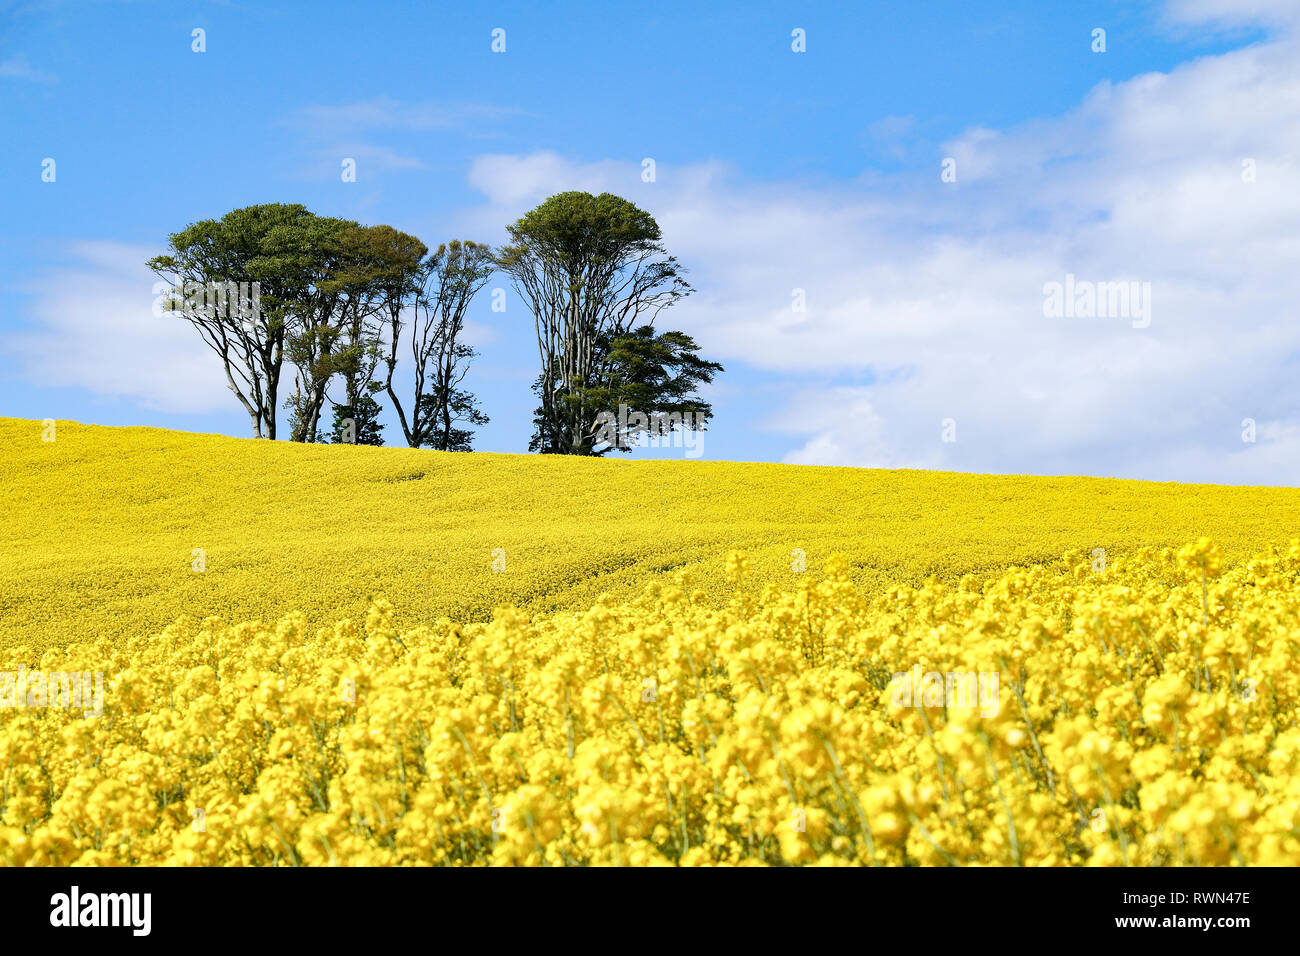 Small clump of trees in field of bright yellow flowers of Rapeseed (Brassica napus) on sunny summer day under a blue sky Stock Photo